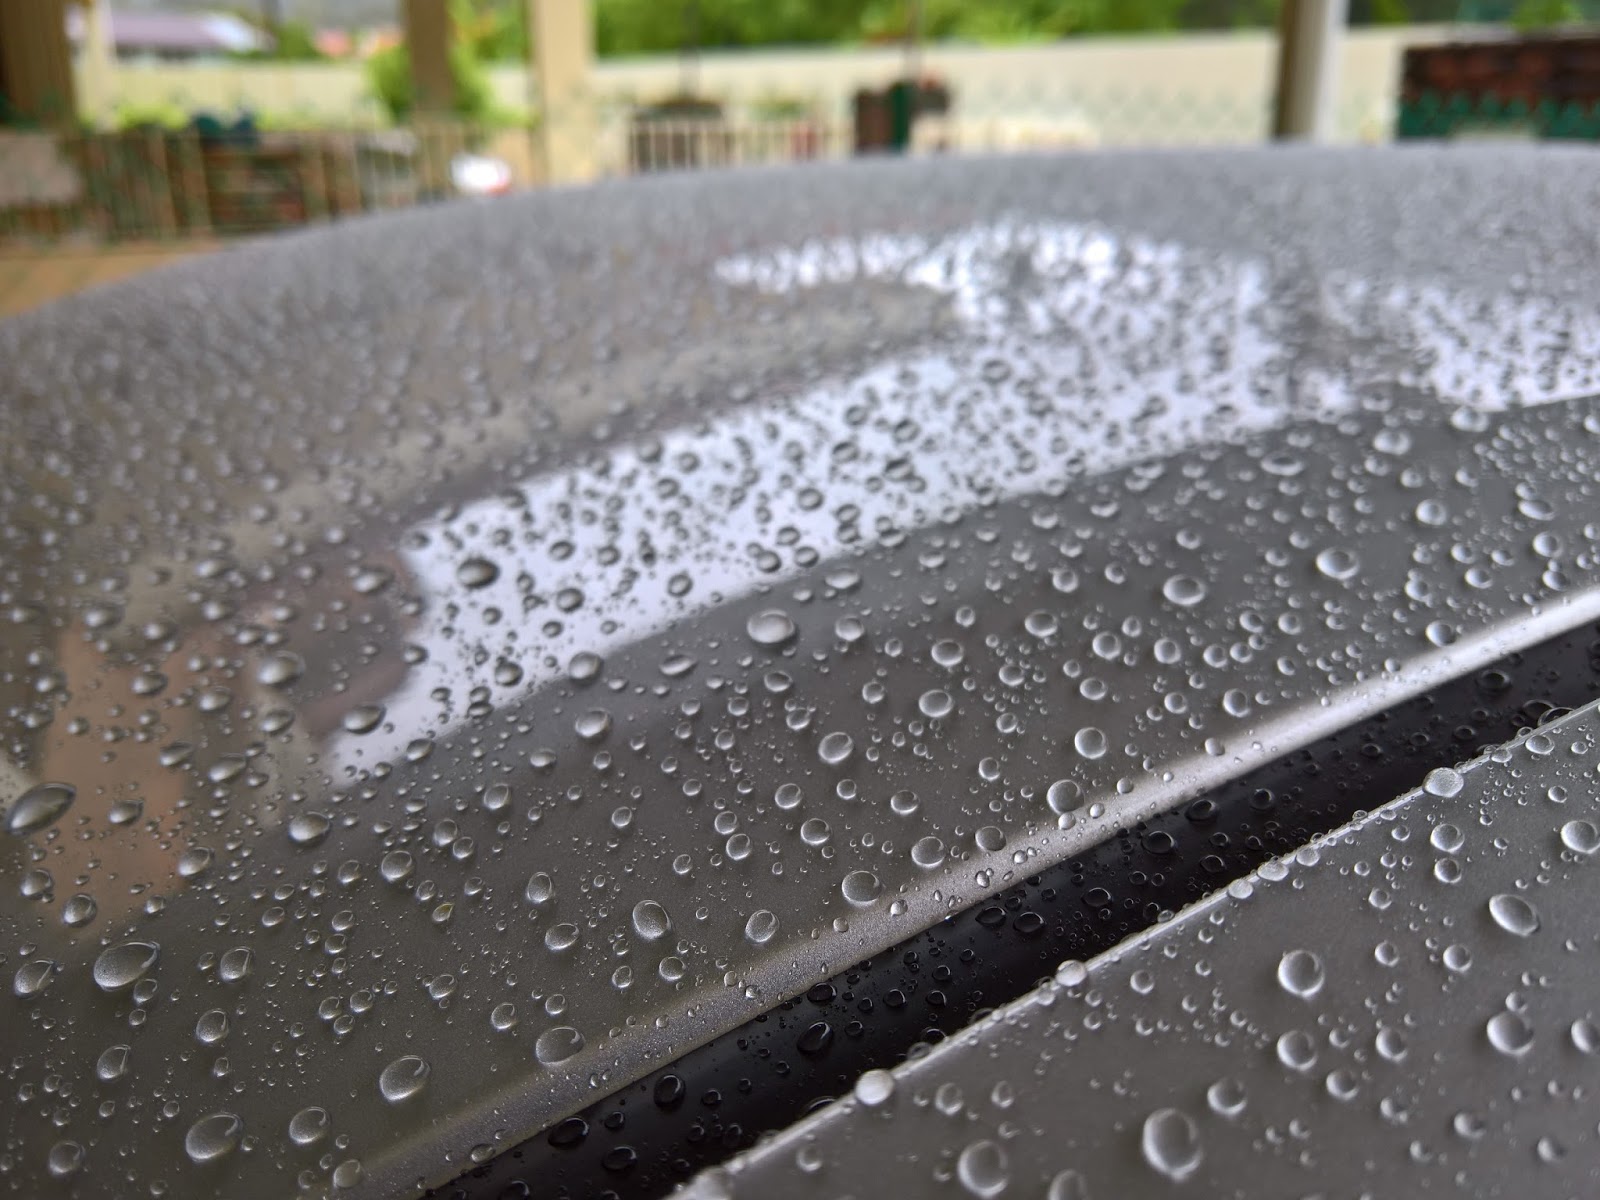 Car Porch Detailer: Short Review of Autoglym Super Resin Polish Extra Gloss  Protection, 5-month Durability